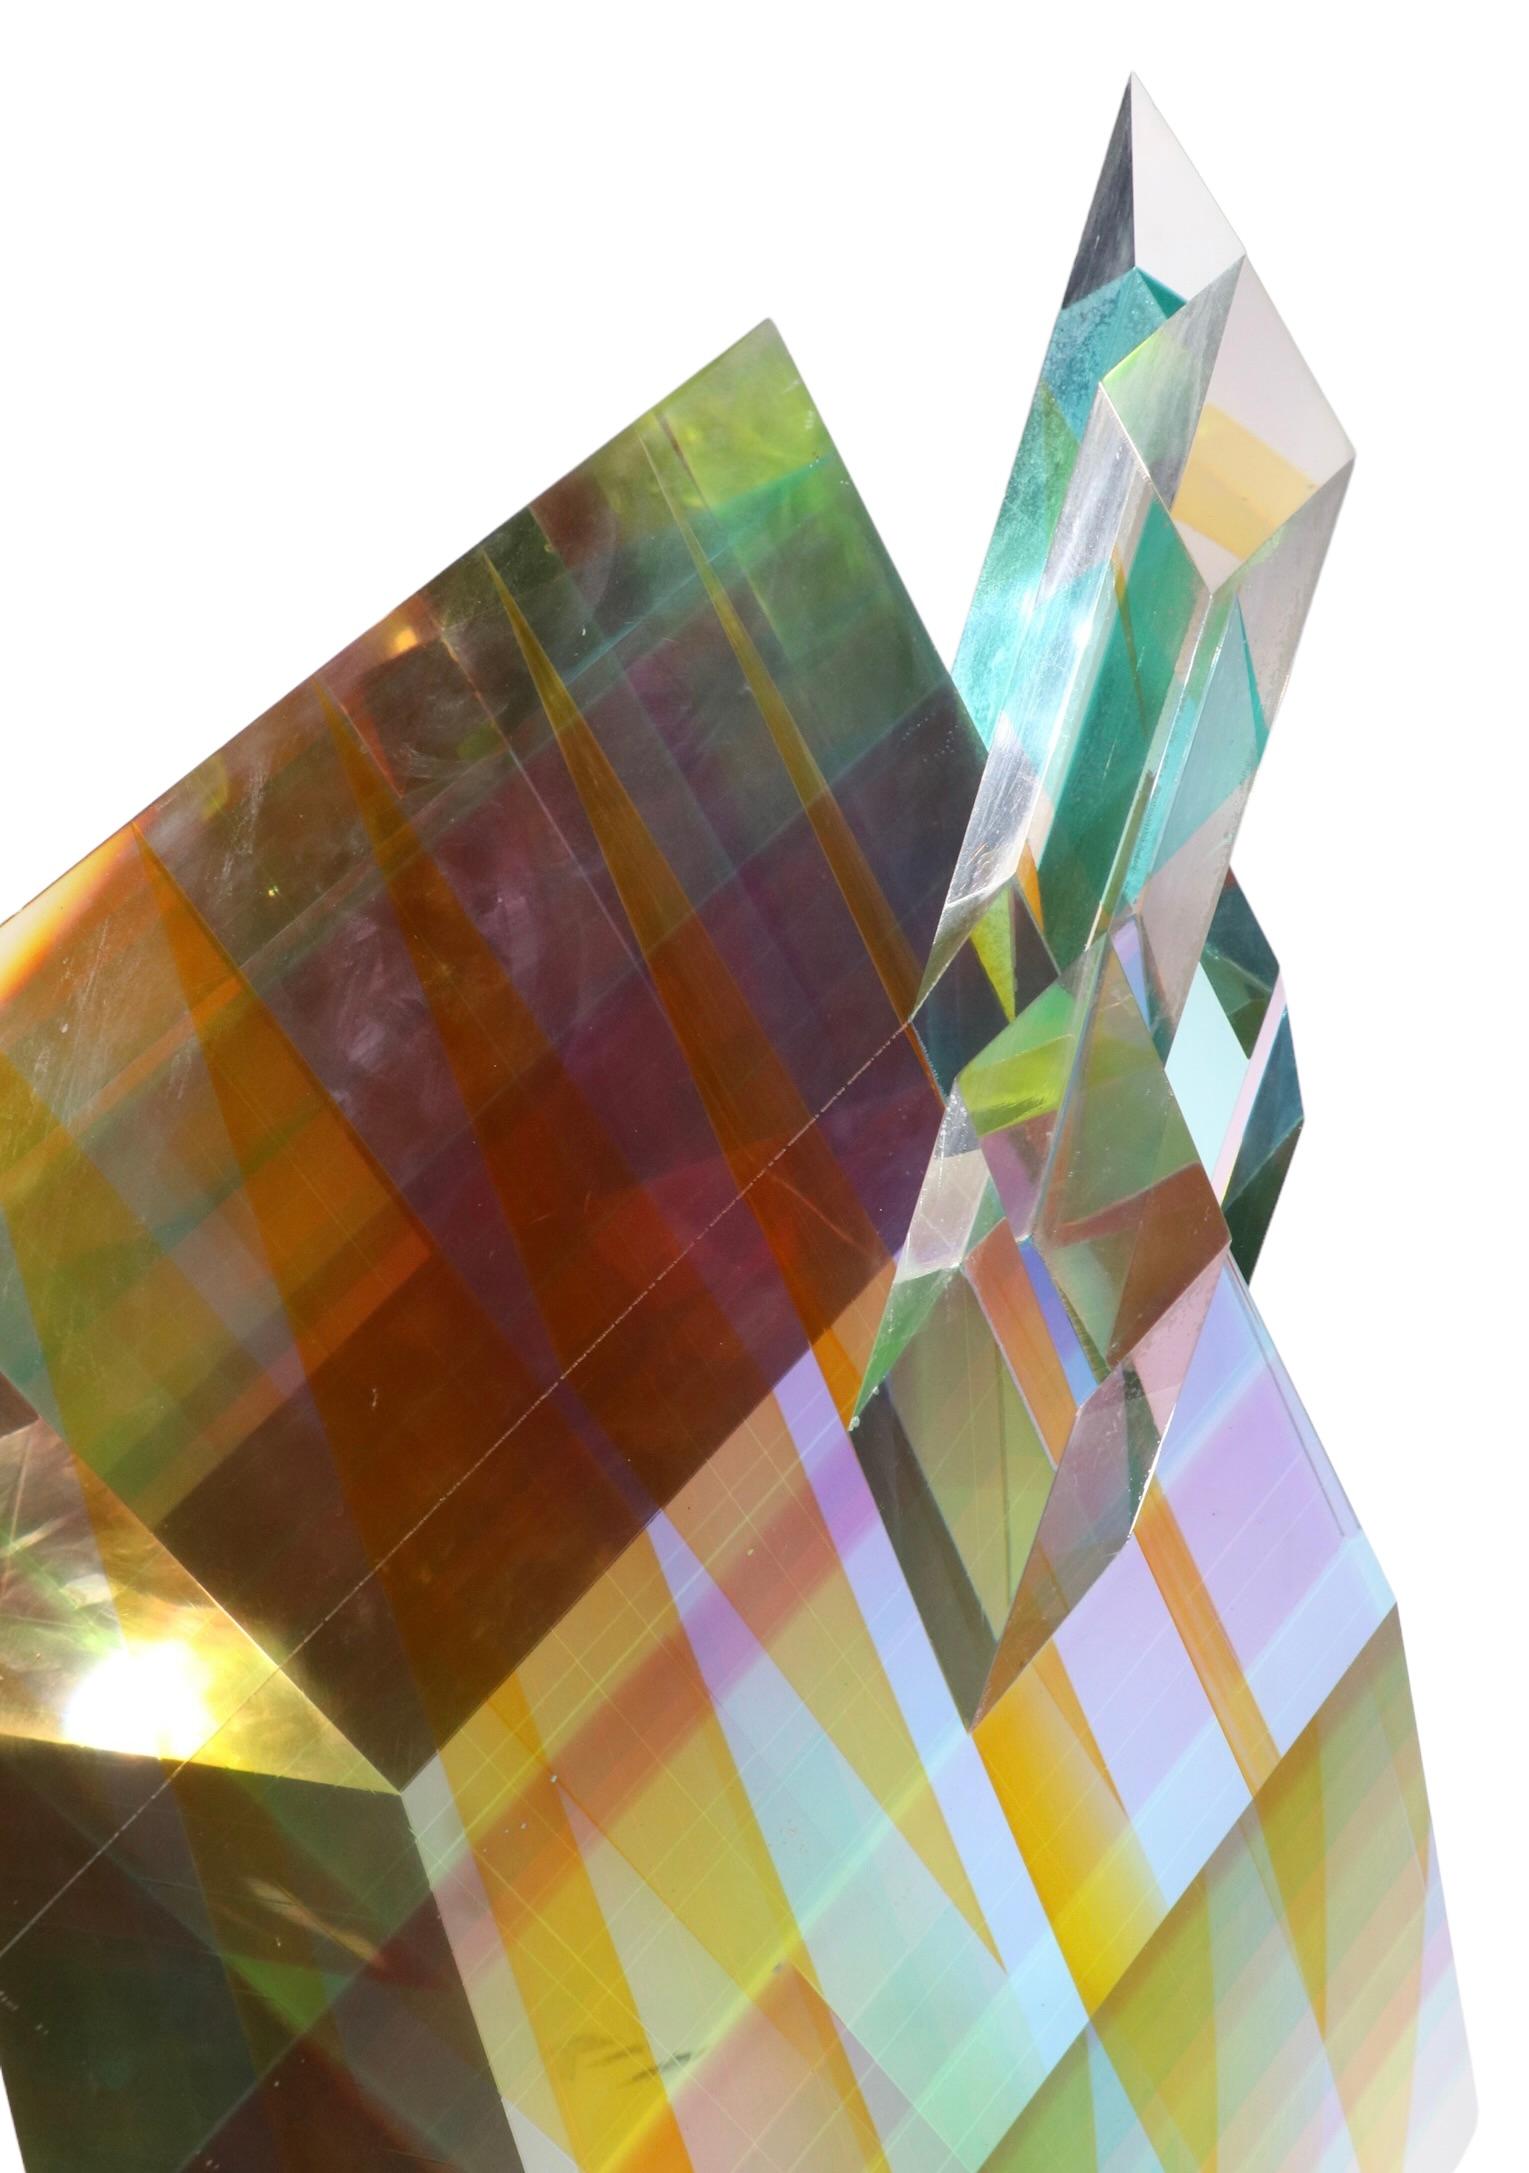 Spectacular post modern sculpture by noted artist Norman Mercer, signed and dated ( Aug. '91 ). This impressive piece is created of colored lucite, which creates a mesmerizing prismatic effect, changing colors and hues as you change your